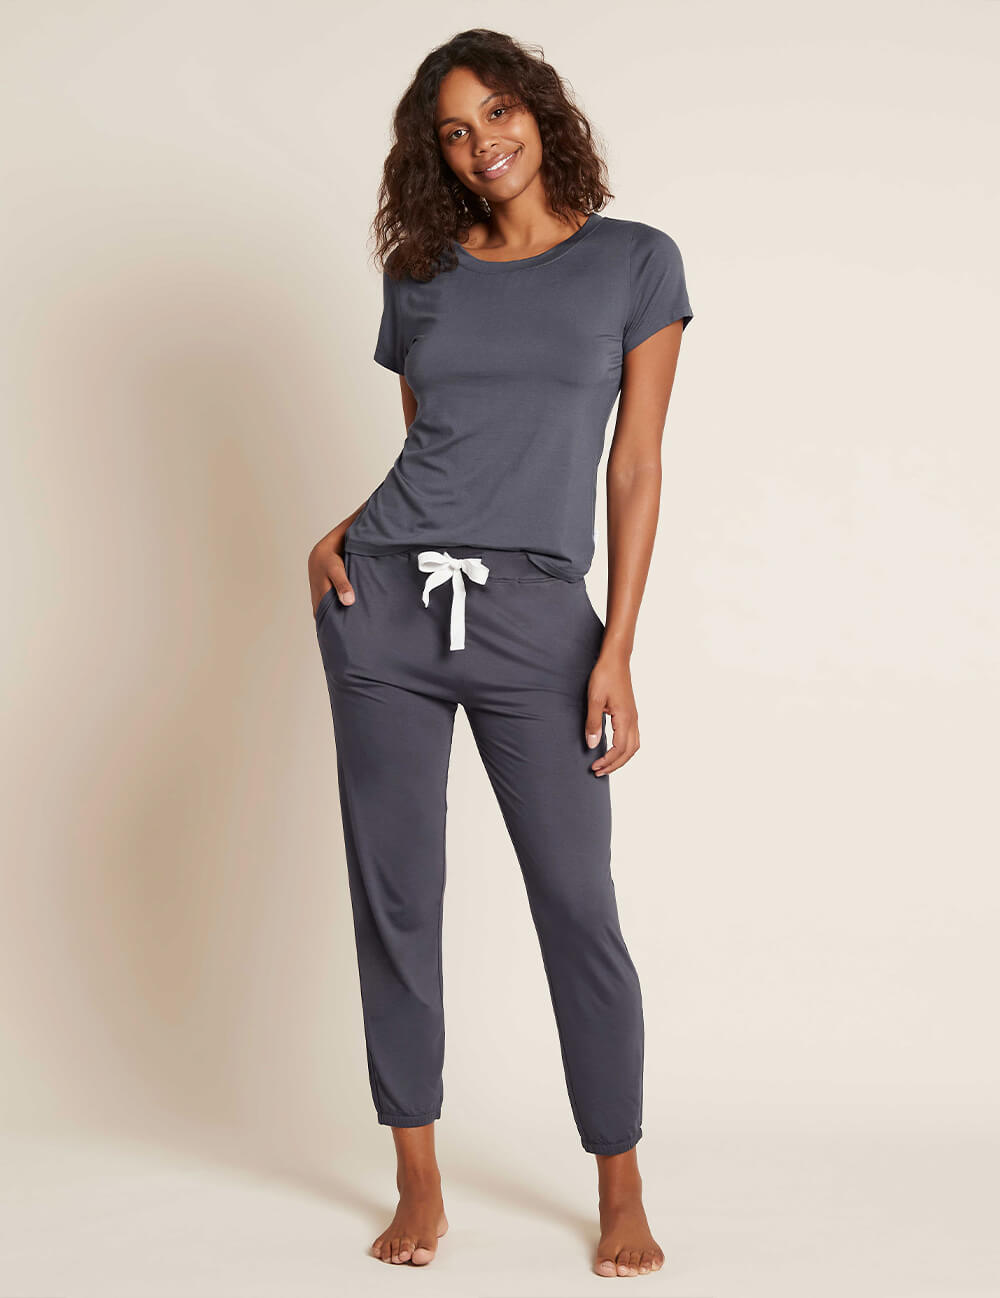 Downtime Lounge Pants in Storm